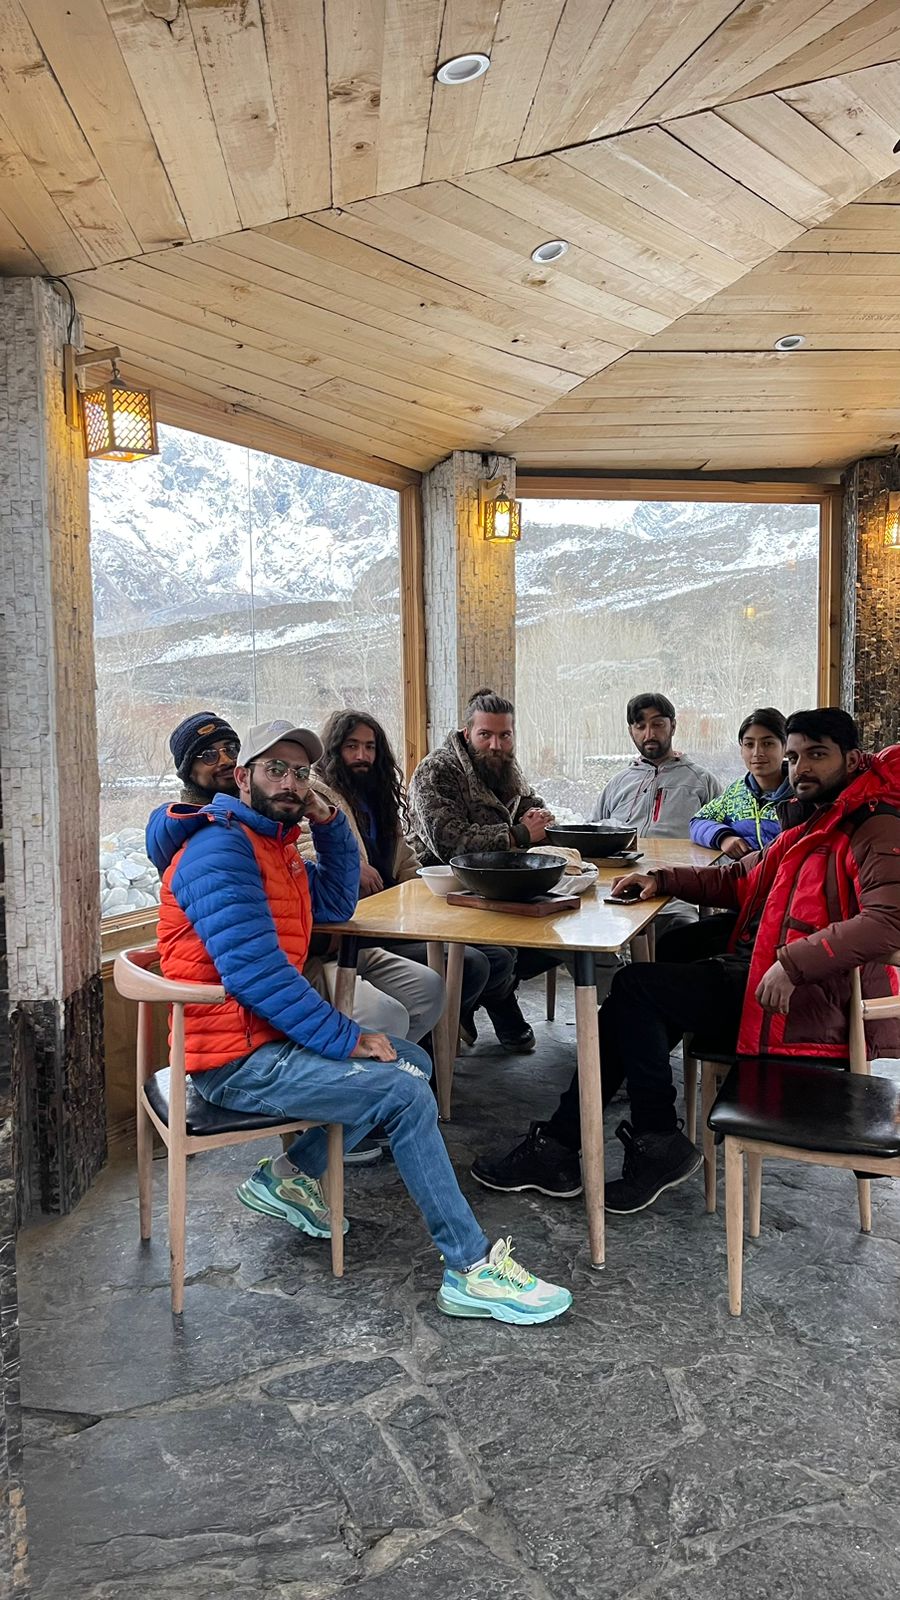 famous yak grill is increasing appetite of tourist in passu region